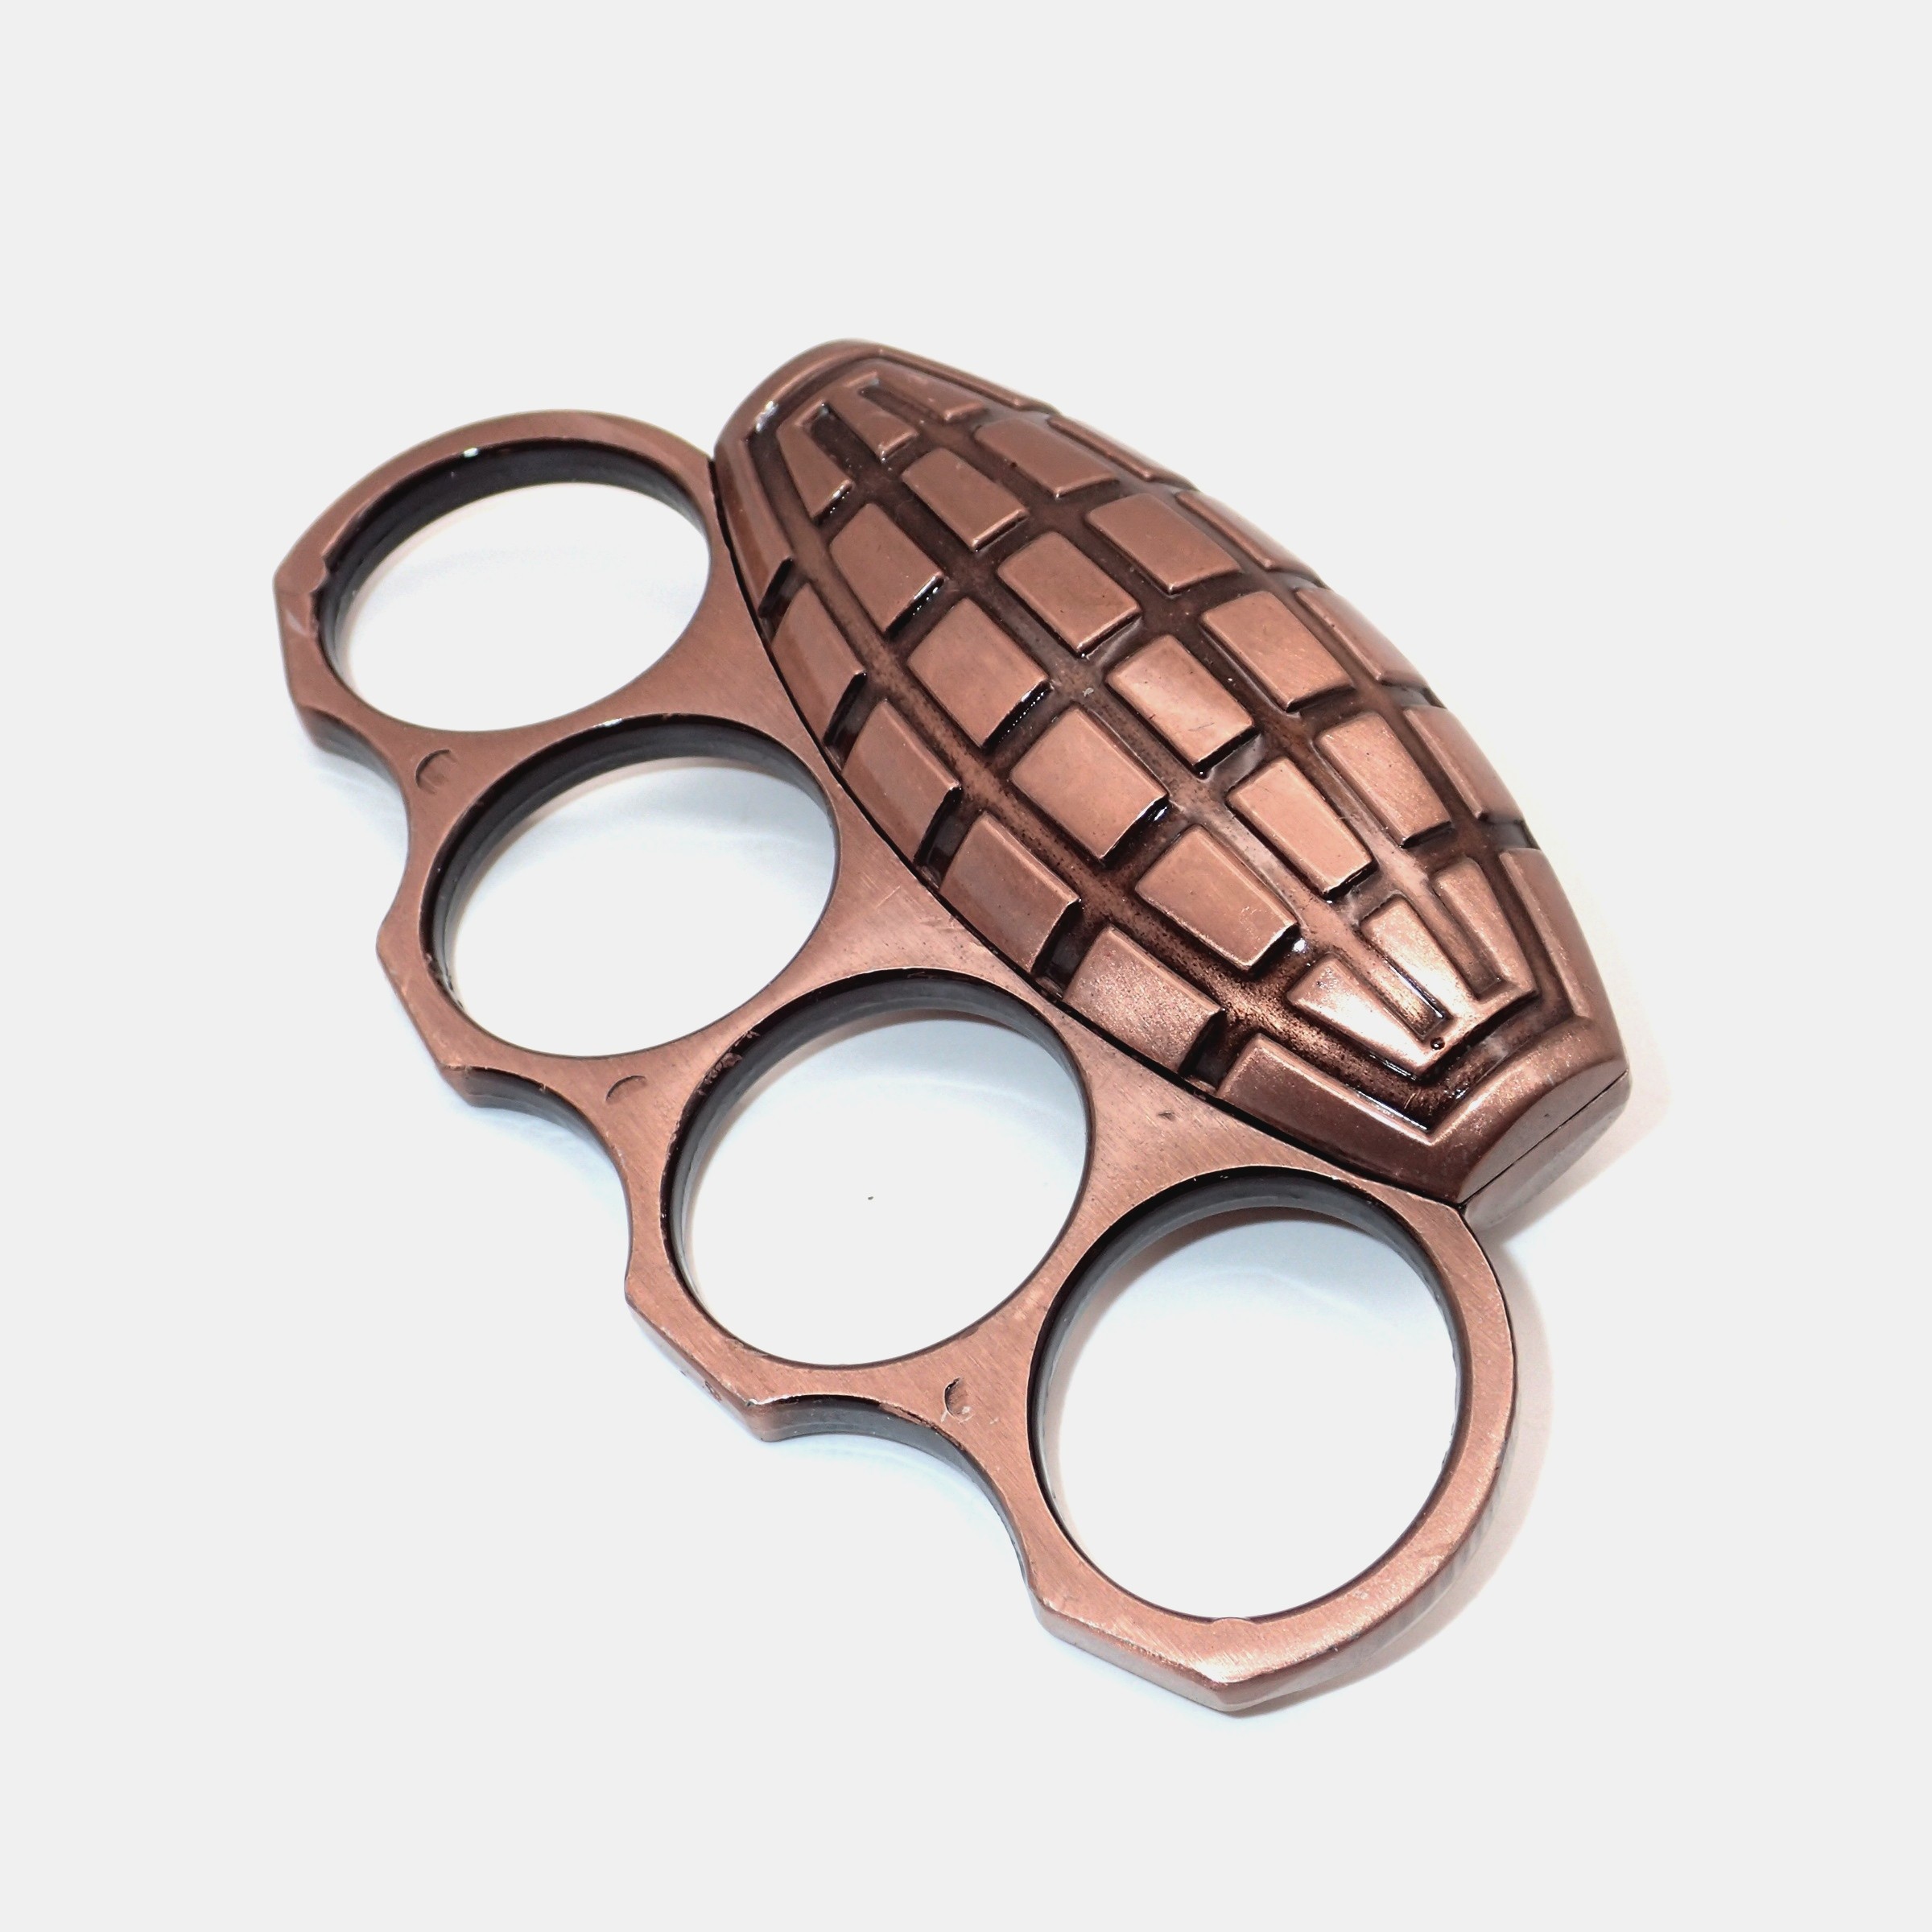 Bk21 Brass Knuckles with Rope Knuckle Duster Security Products - China Brass  Knuckles, Knuckles